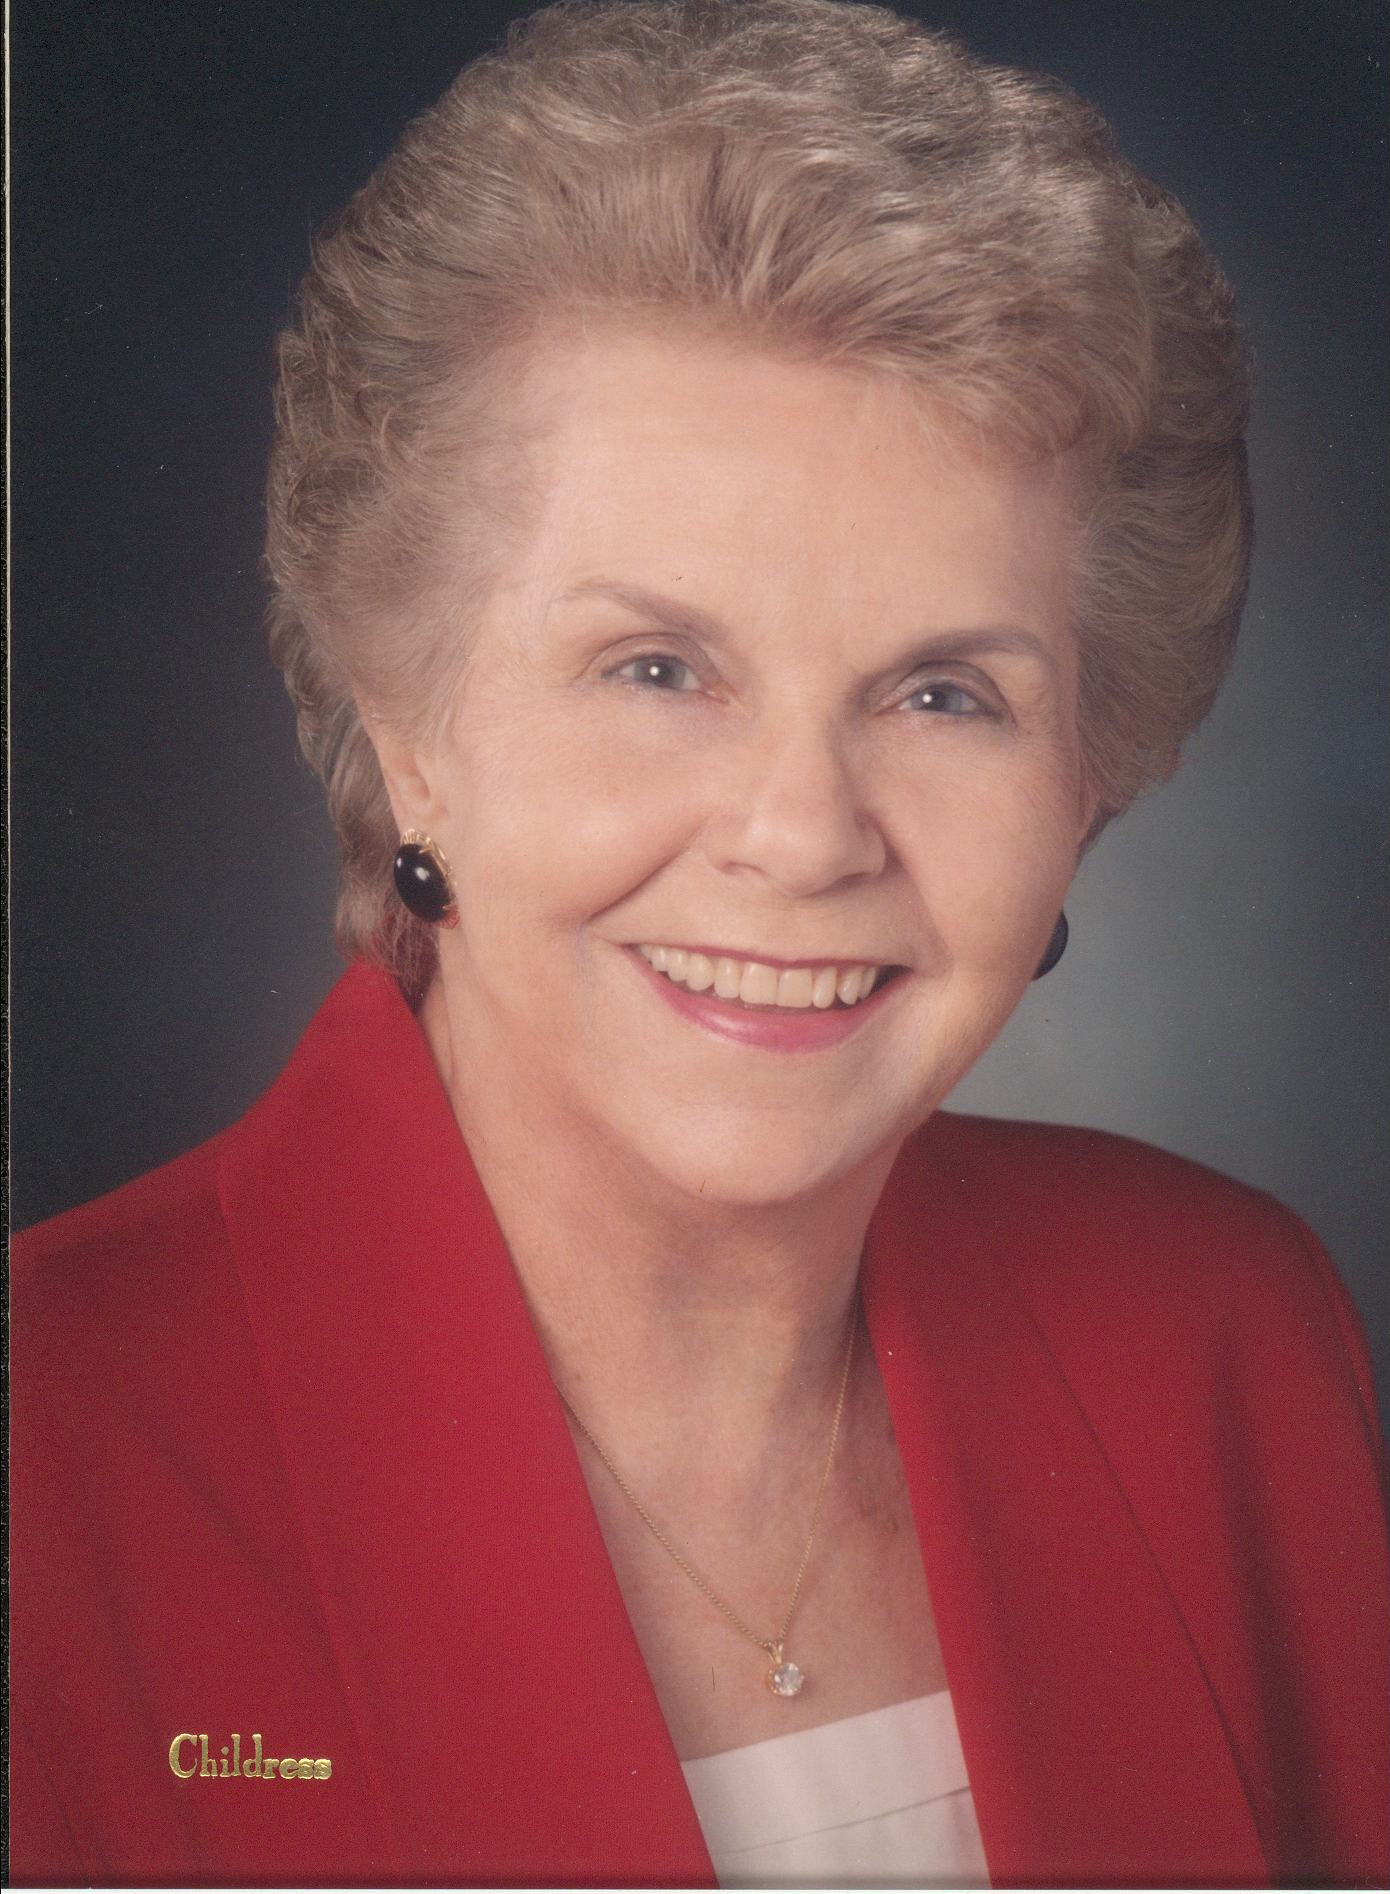 Our hearts go out to the Hoover and Crawford families in the passing of Dean Hoover's beloved mother, Dr. Catherine Barnett Crawford of Lubbock, Texas. 